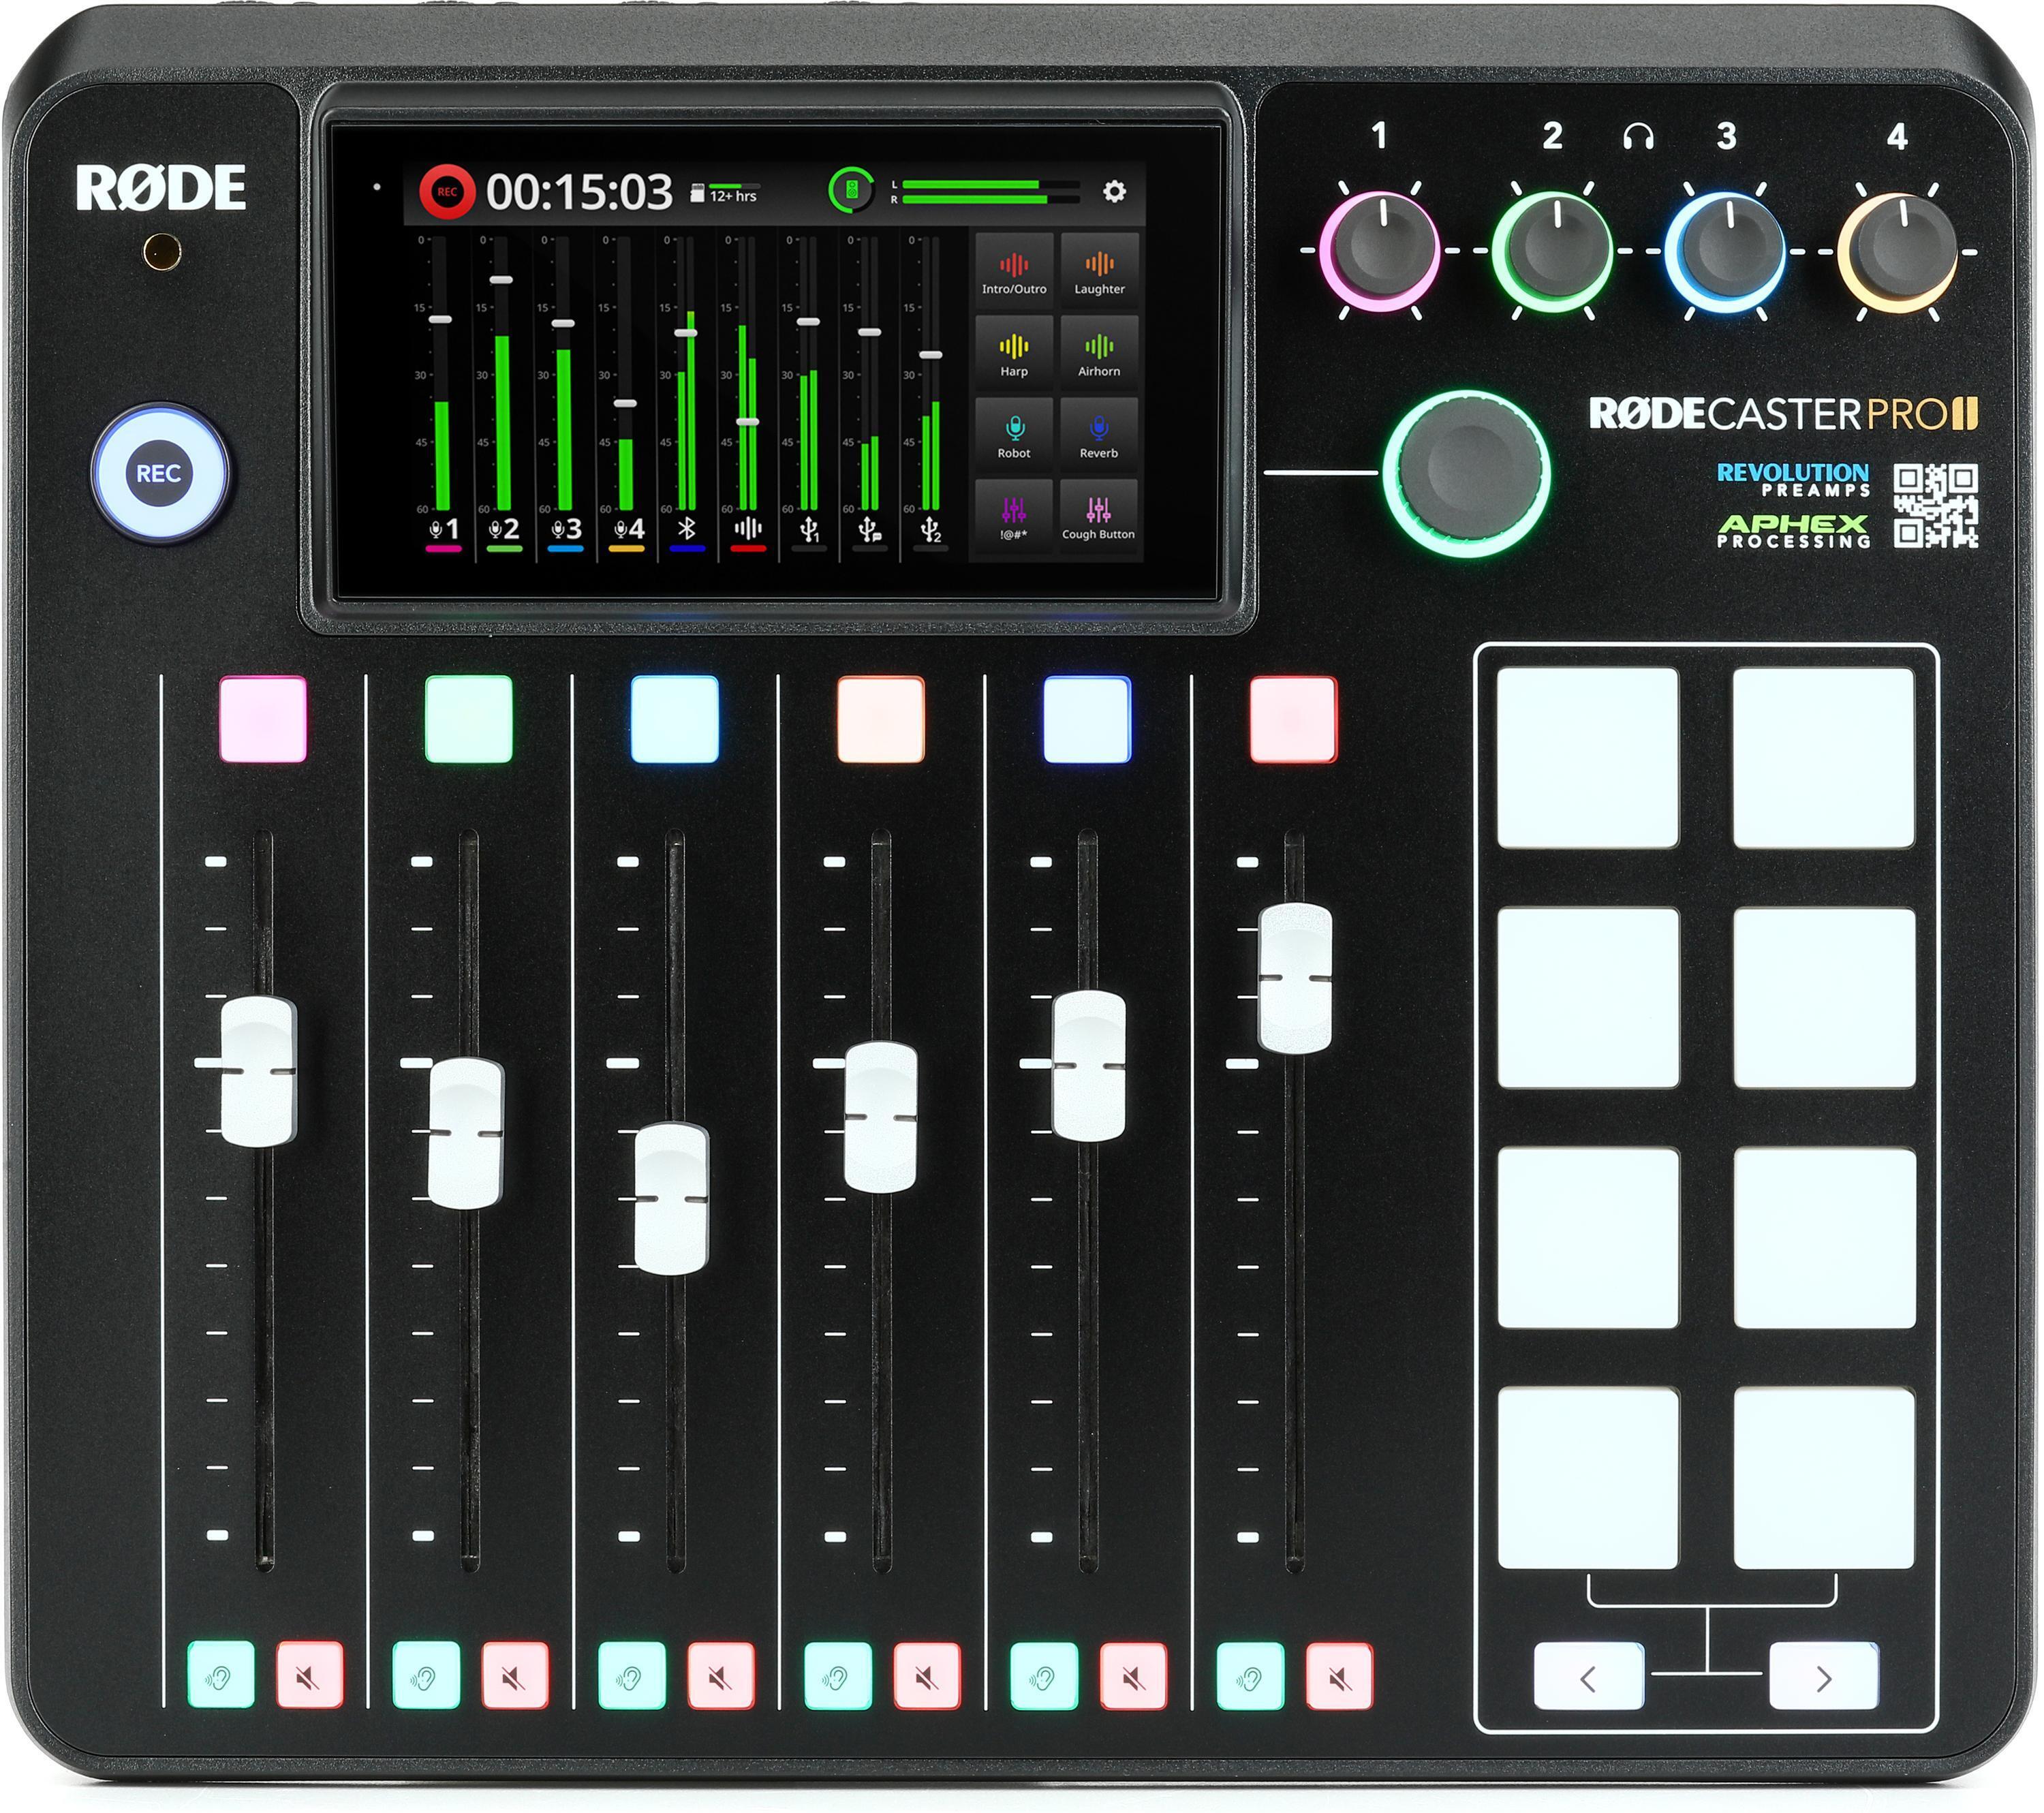 Bundled Item: Rode Rodecaster Pro II Podcast Production Console